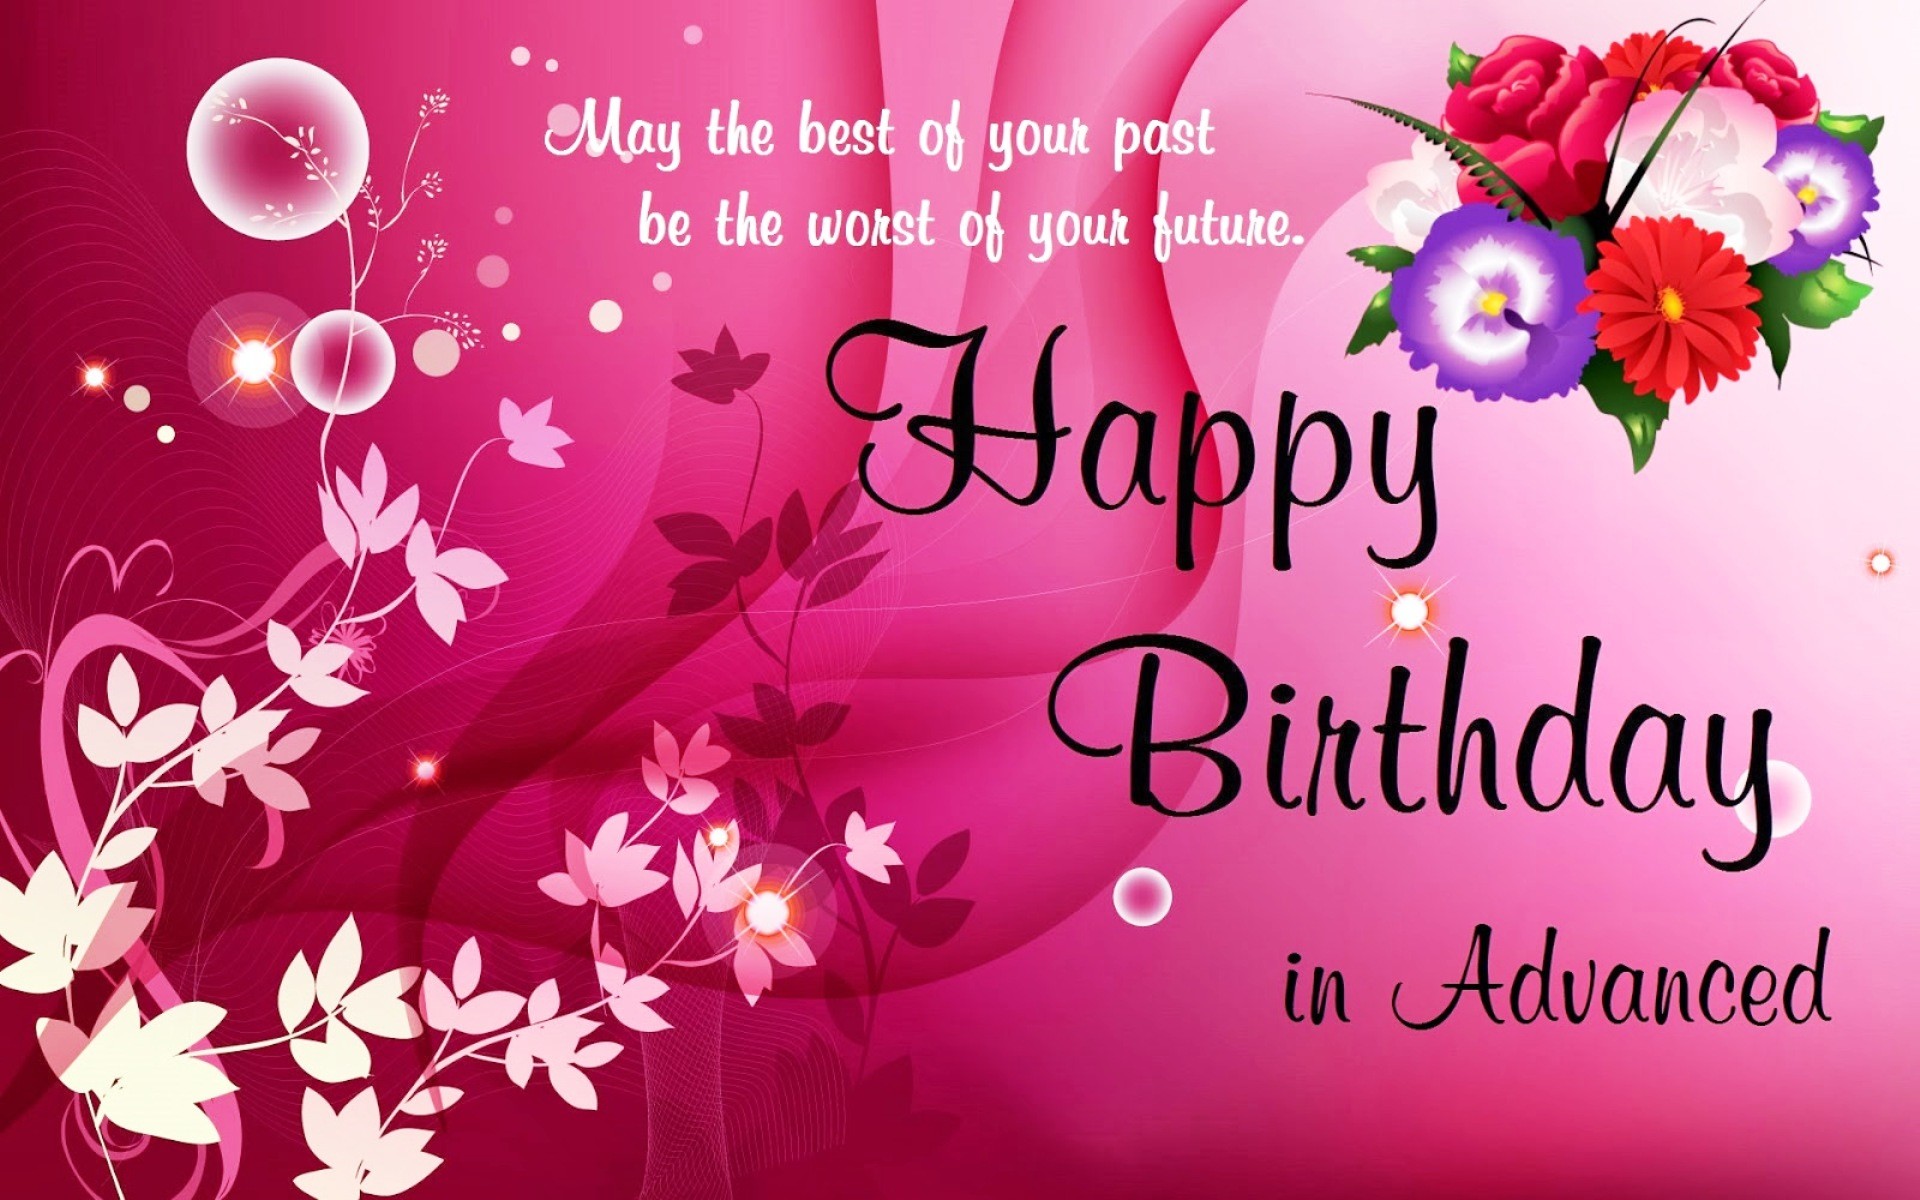 1920x1200 advance happy birthday wishes pictures , wallpapers and quotes. wishing  Advance happy birthday is always good sign and explore pictures wallpapers  and quote